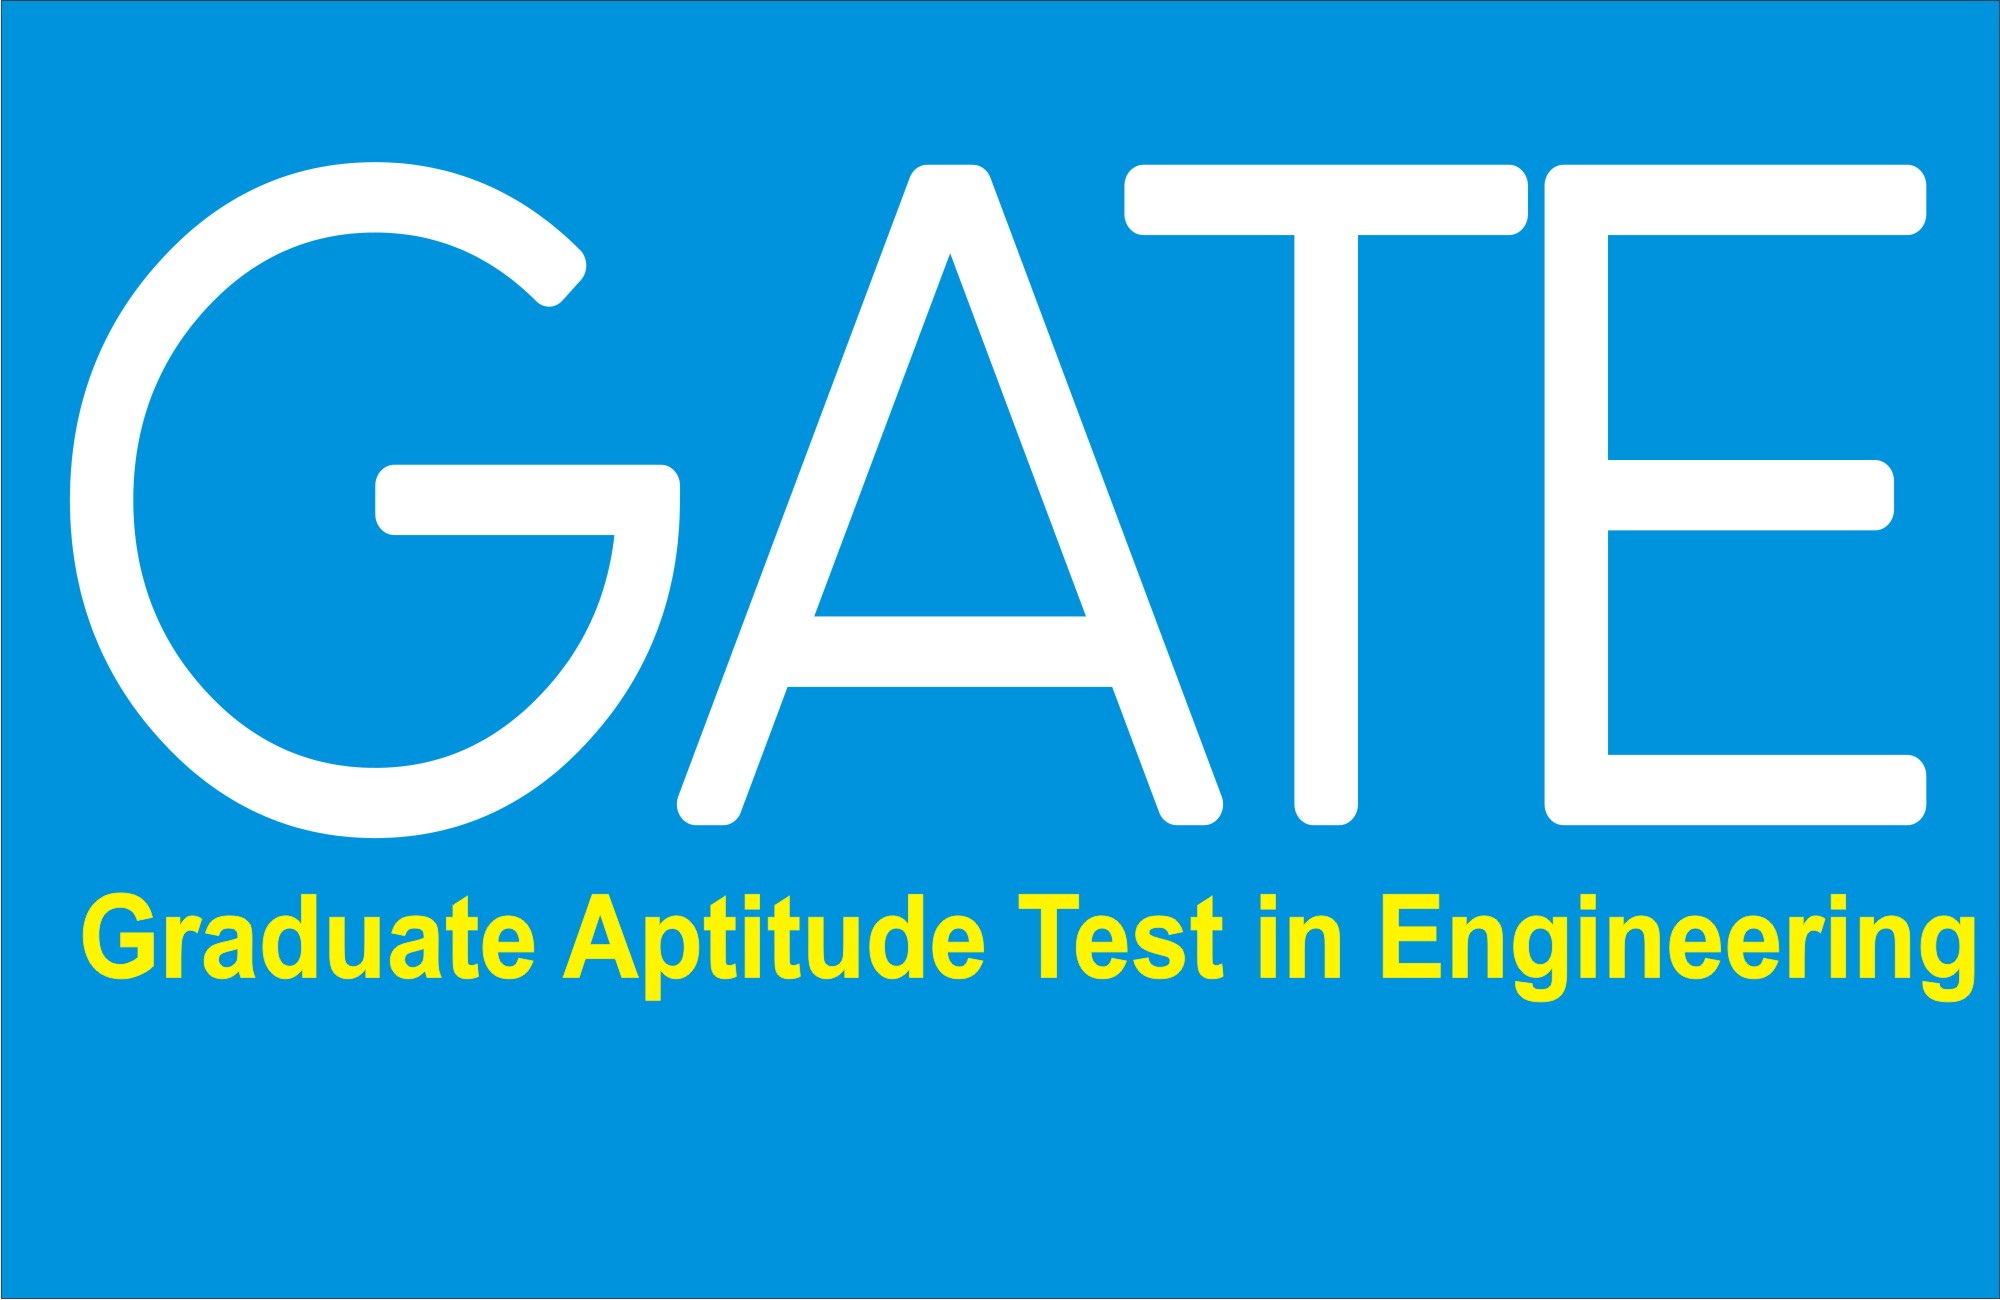 GATE Admit Card 2017 to be released for Download on 5th January at gate.iitr.ernet.in